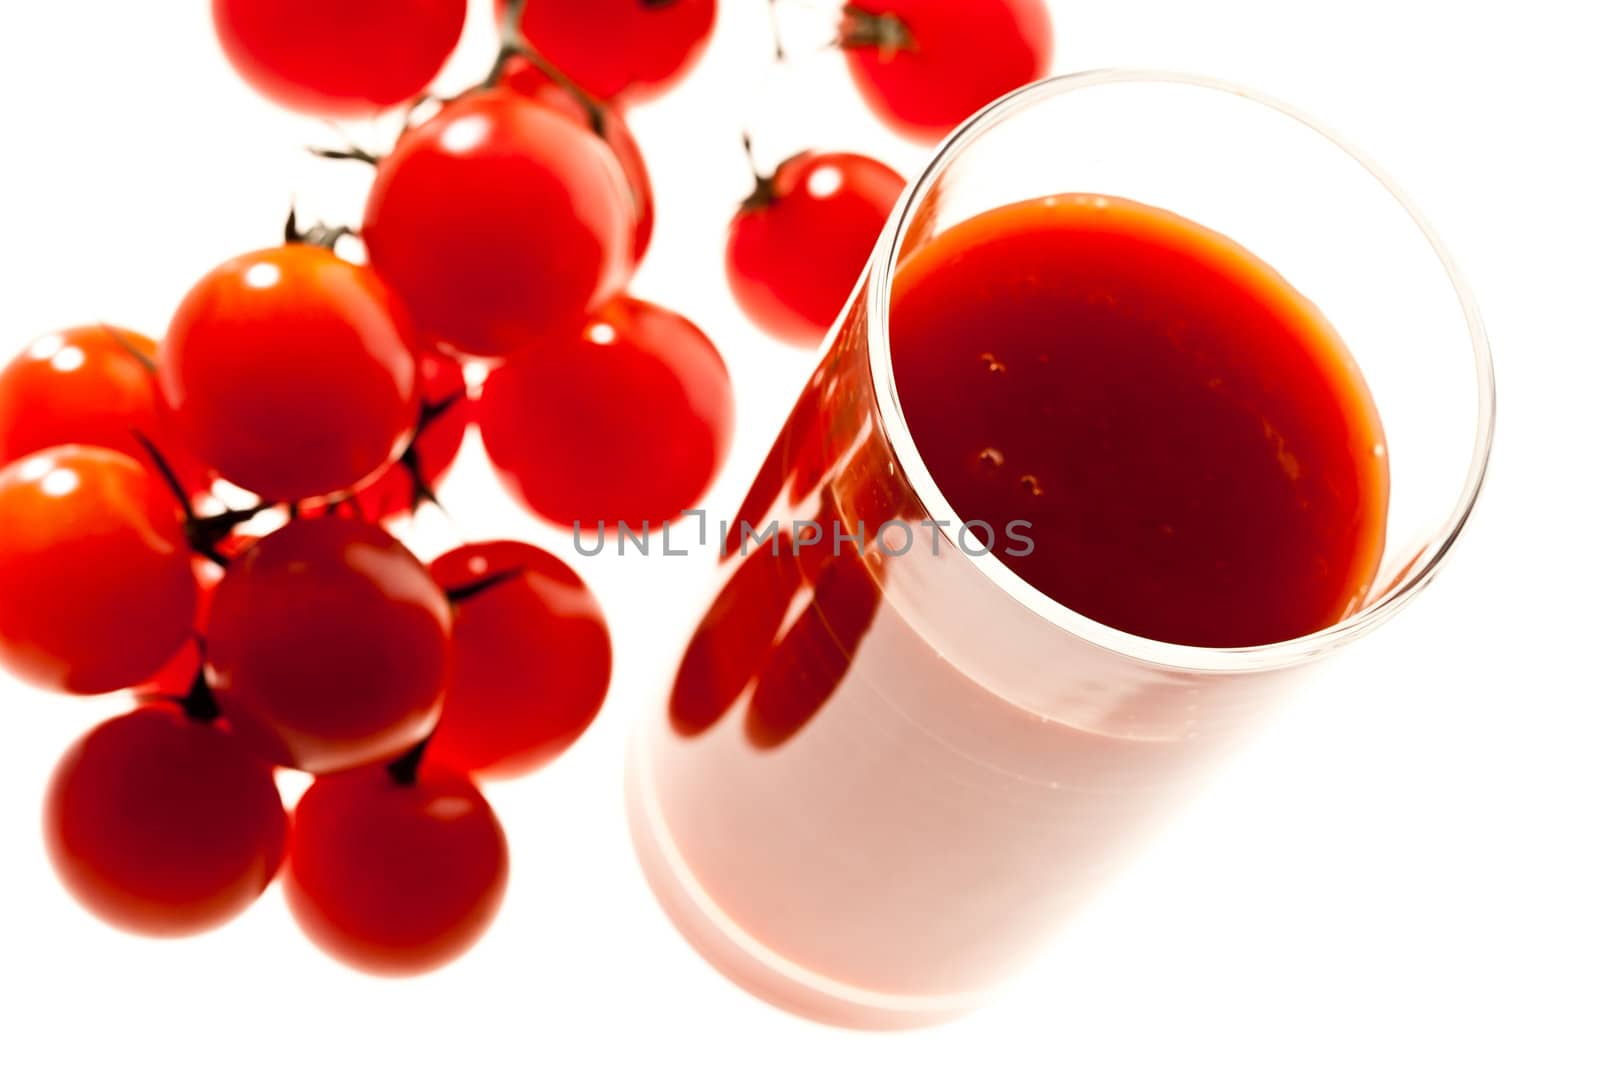 food series: branch of red tomato and juice over white